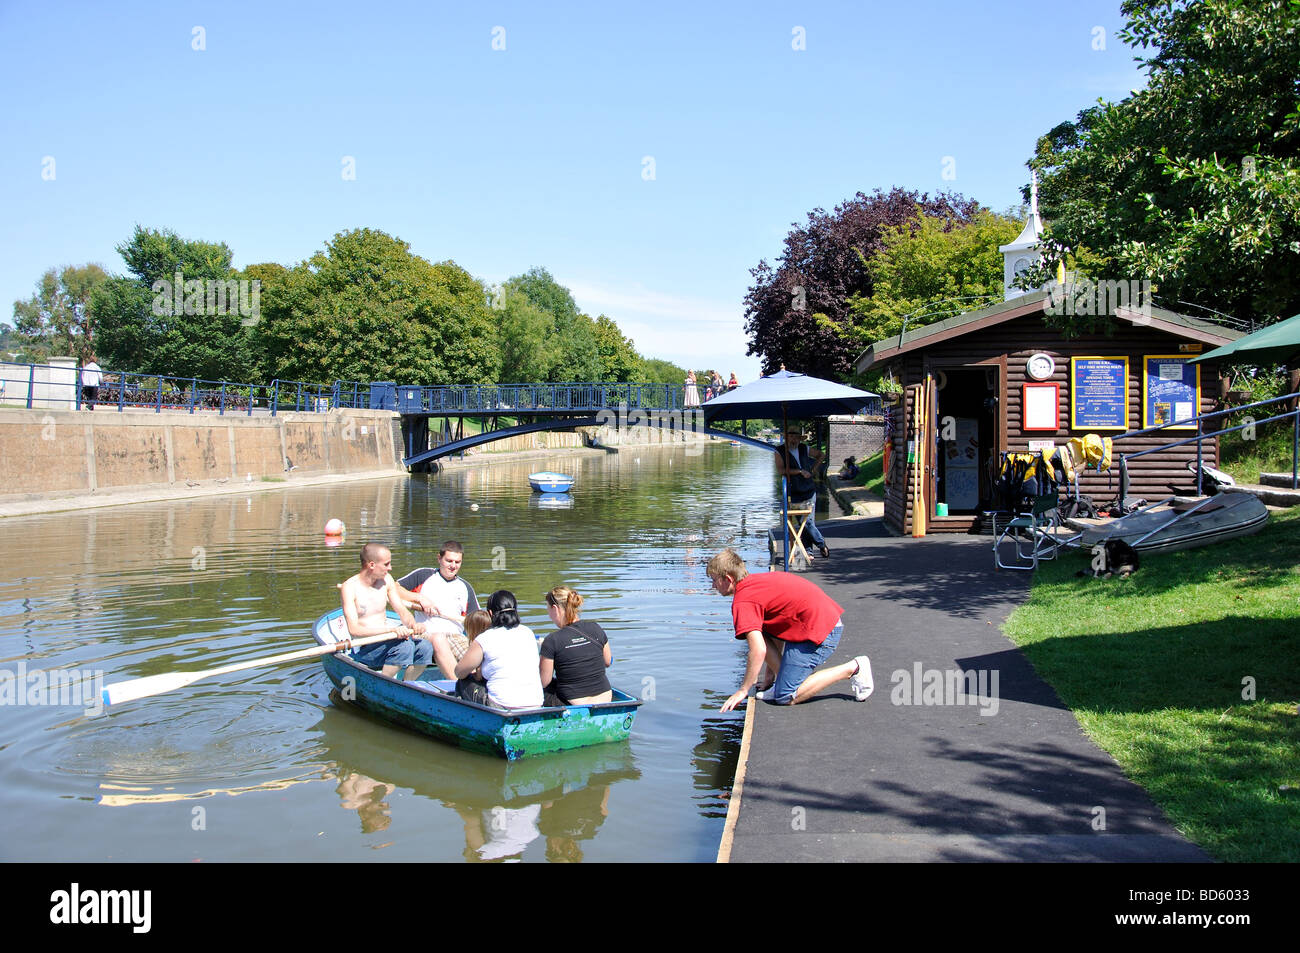 Boating on the Royal Military Canal, Hythe, Kent, England, United Kingdom Stock Photo